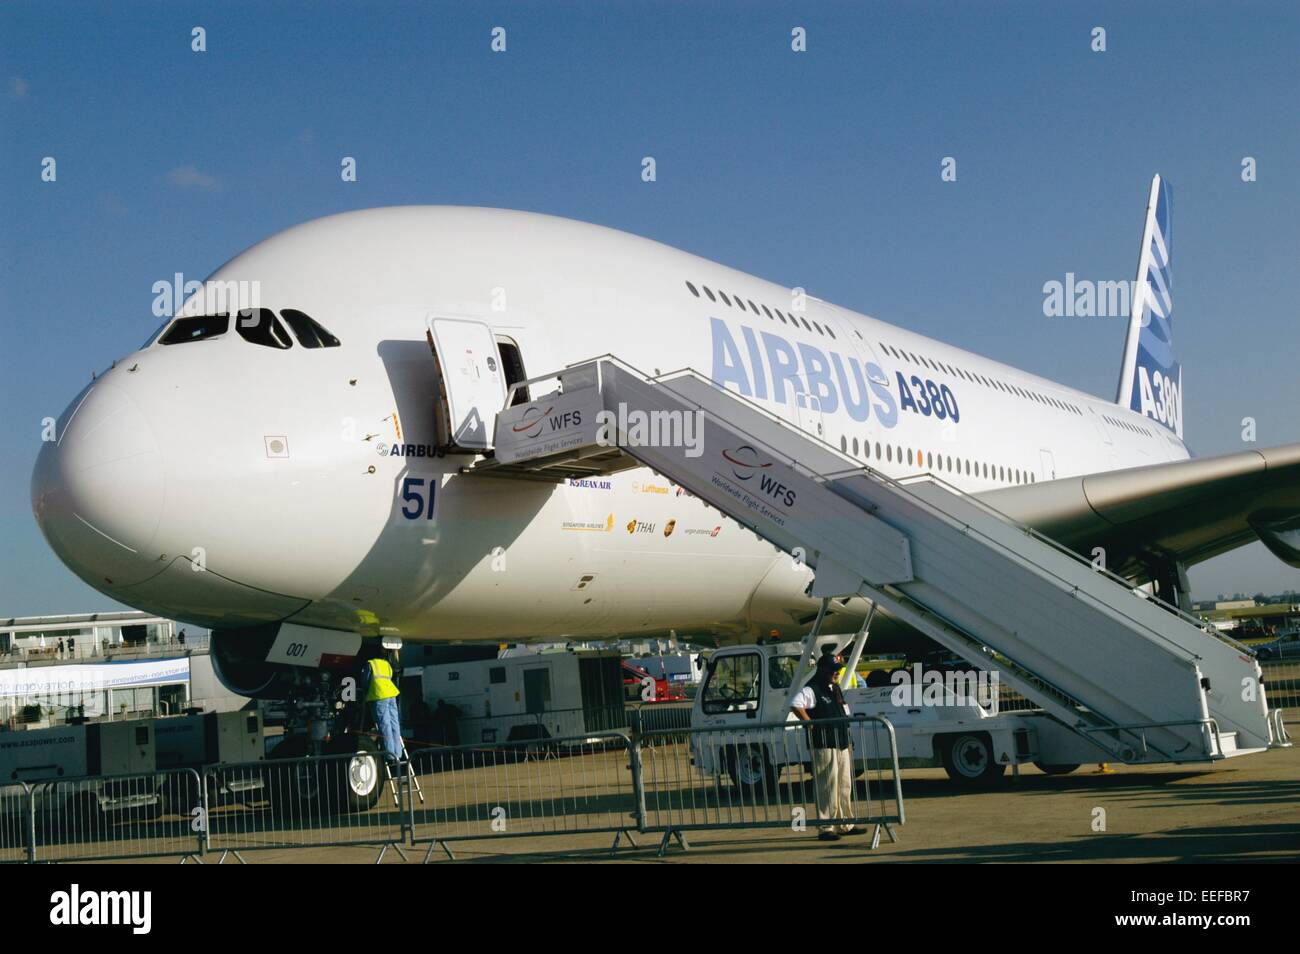 Airbus A 380 airliner Stock Photo